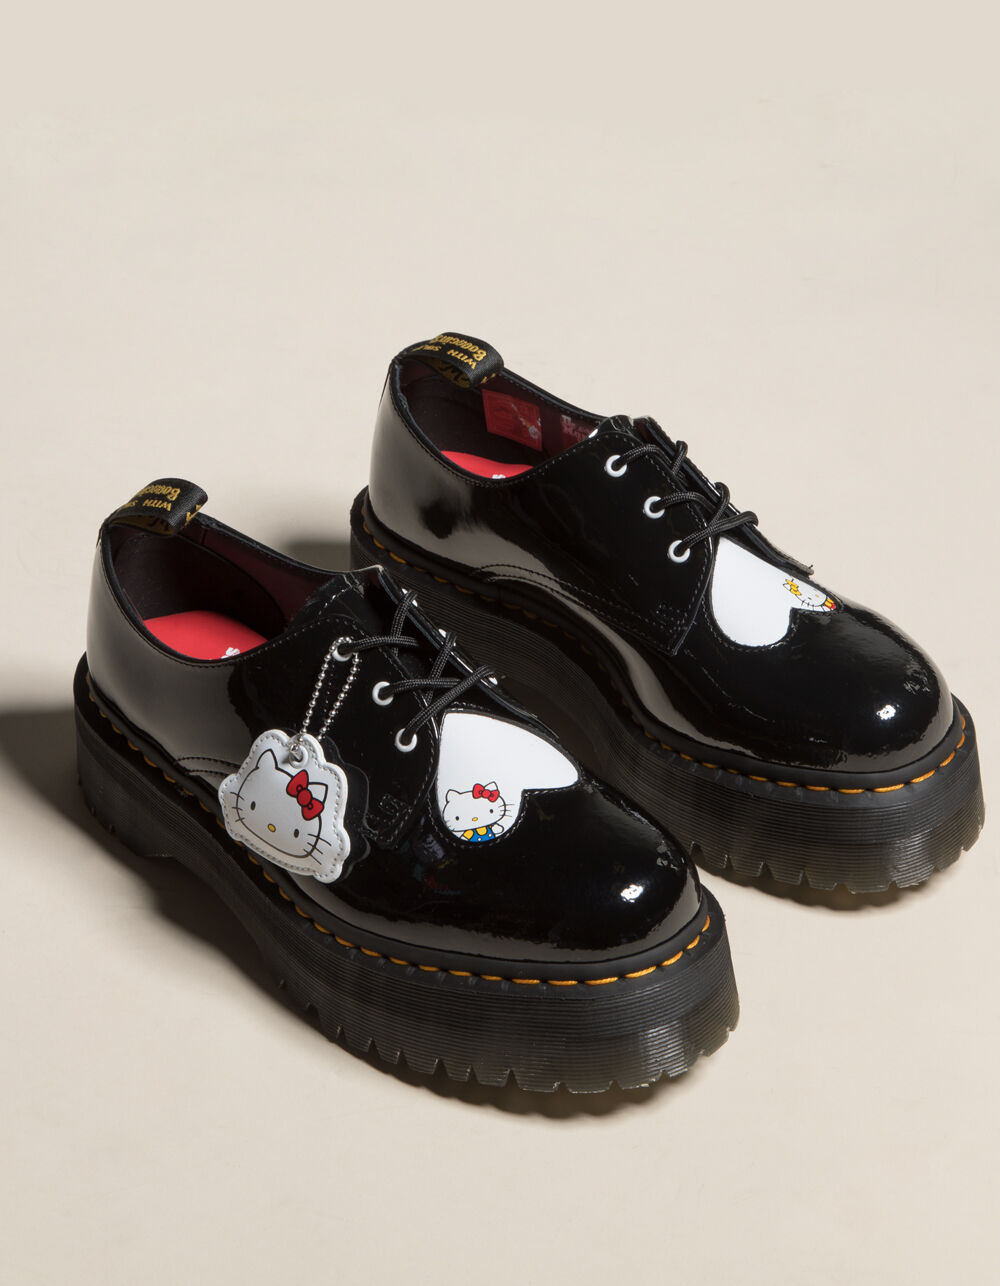 DR. MARTENS x Hello Kitty 1461 Quad Womens Shoes - BLACK | Tillys